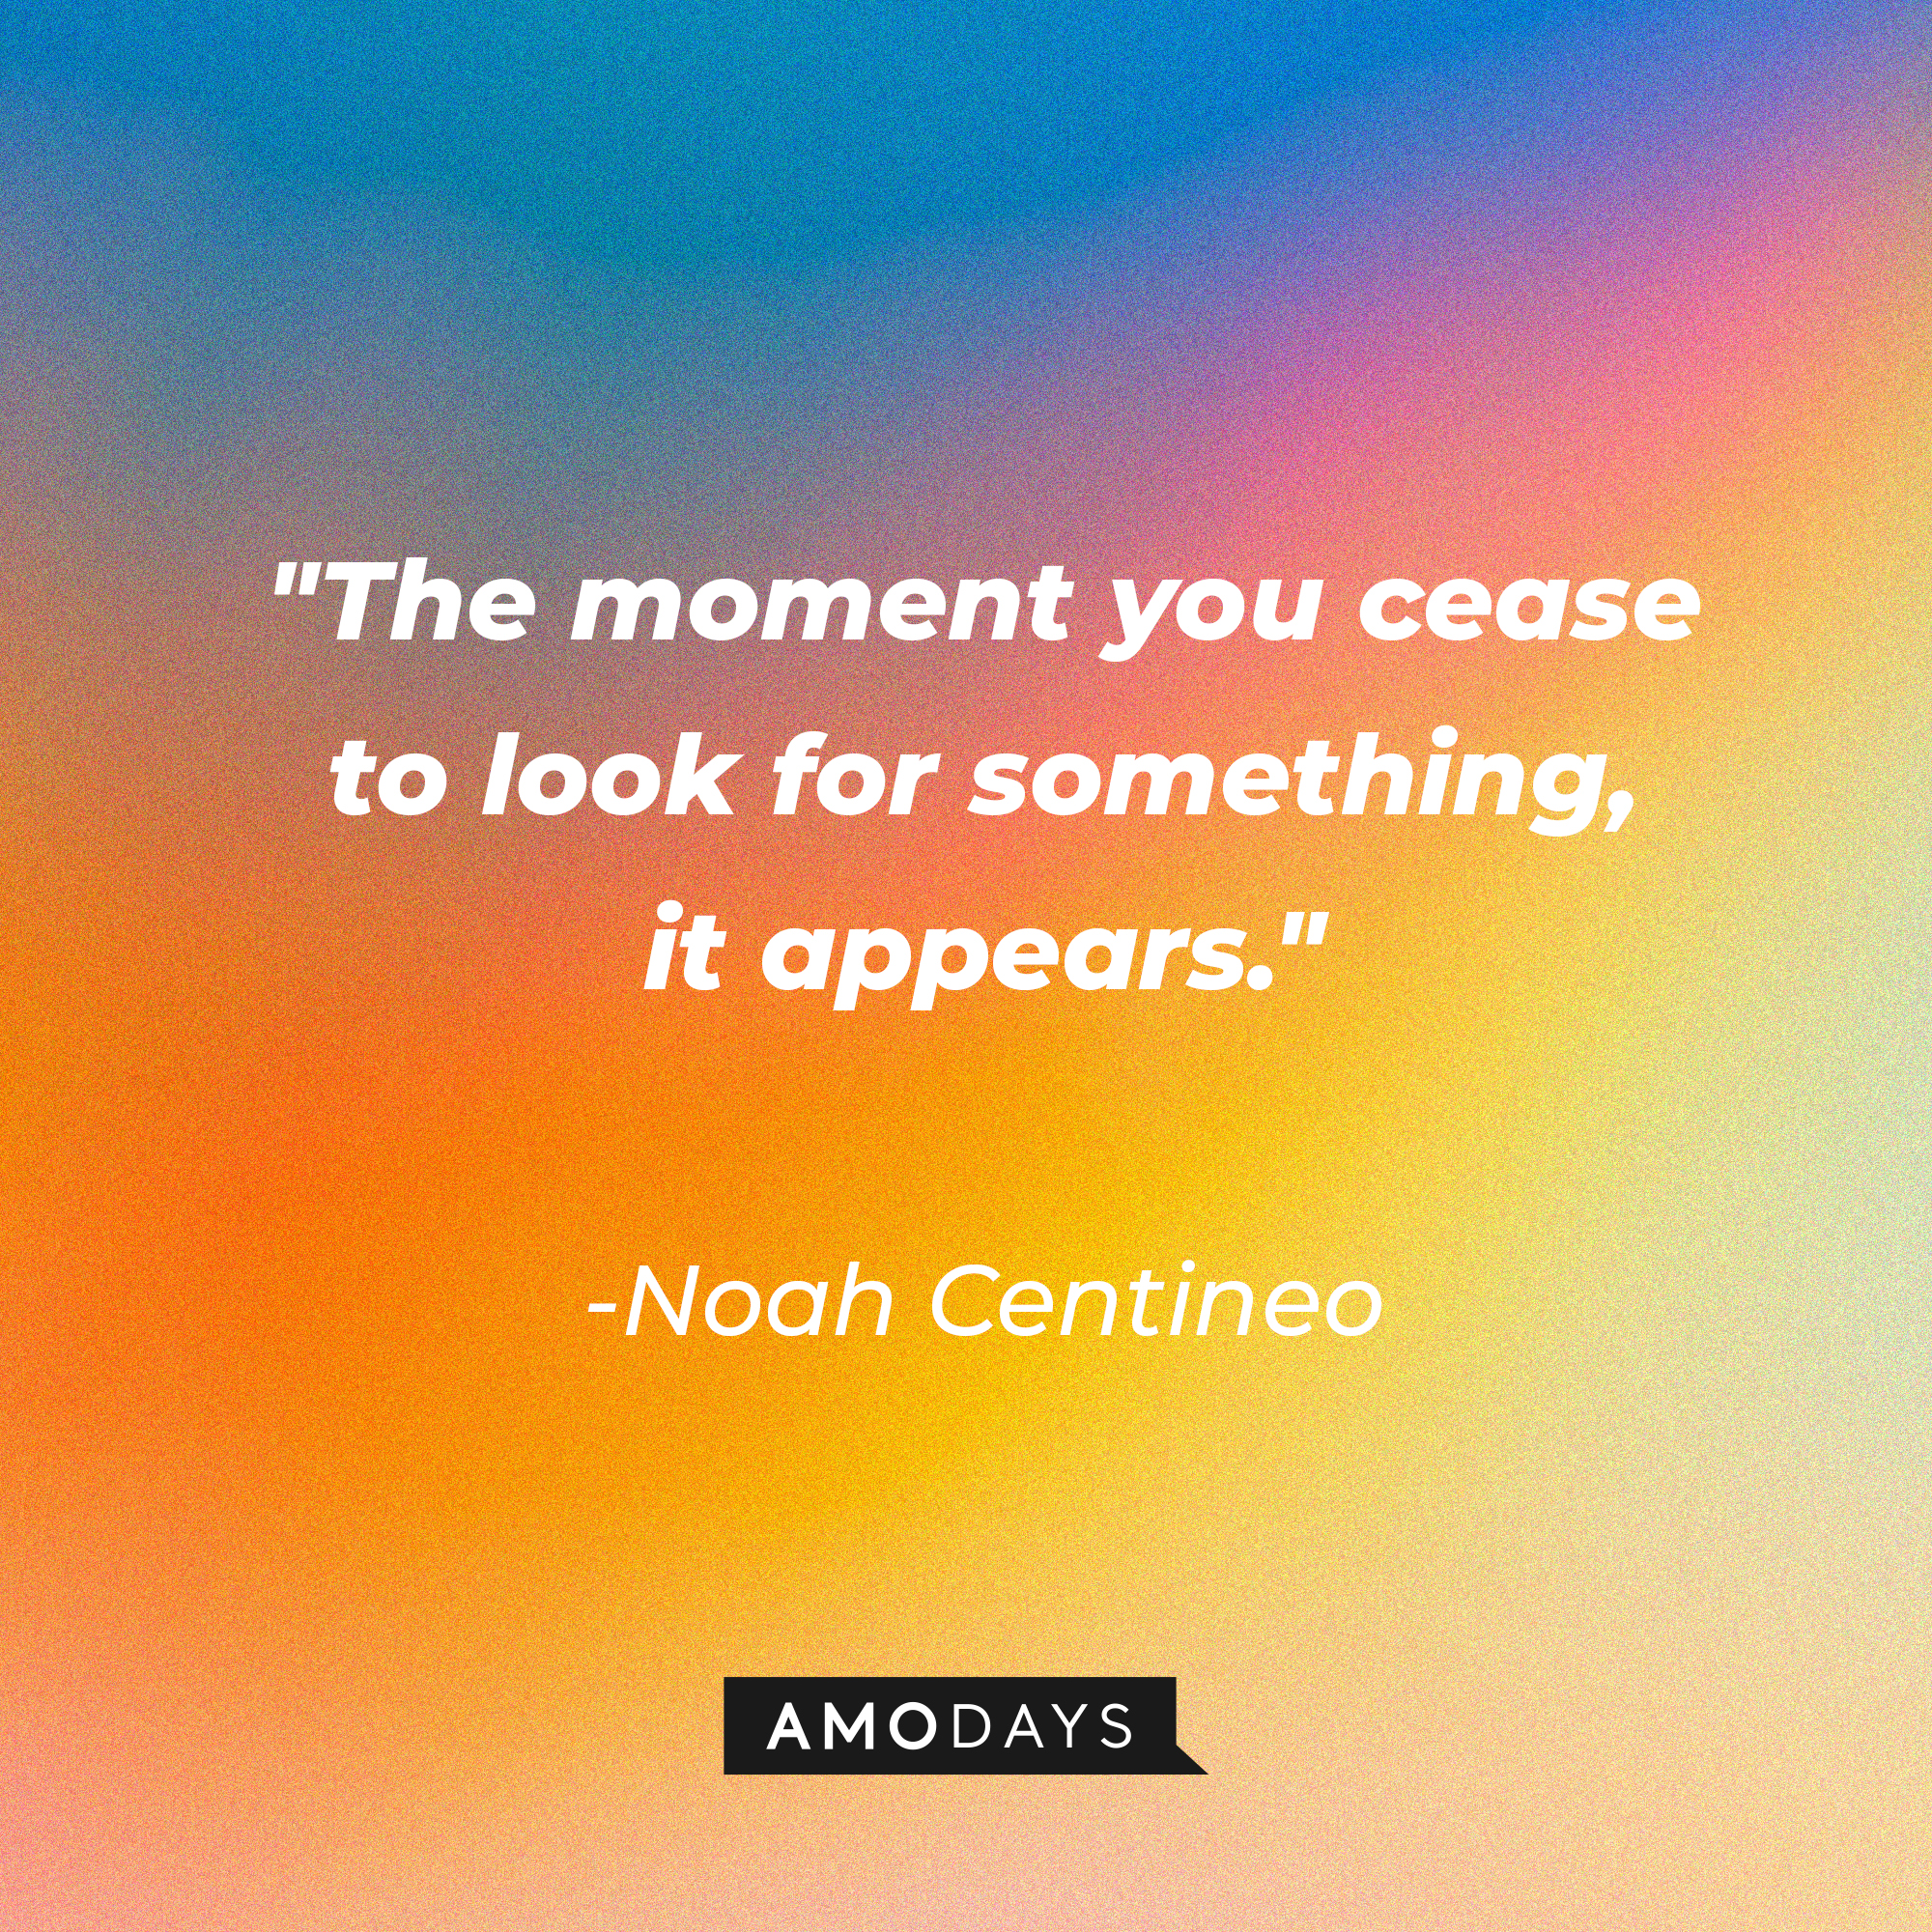 Noah Centineo's quote: "The moment you cease to look for something, it appears." | Image: AmoDays